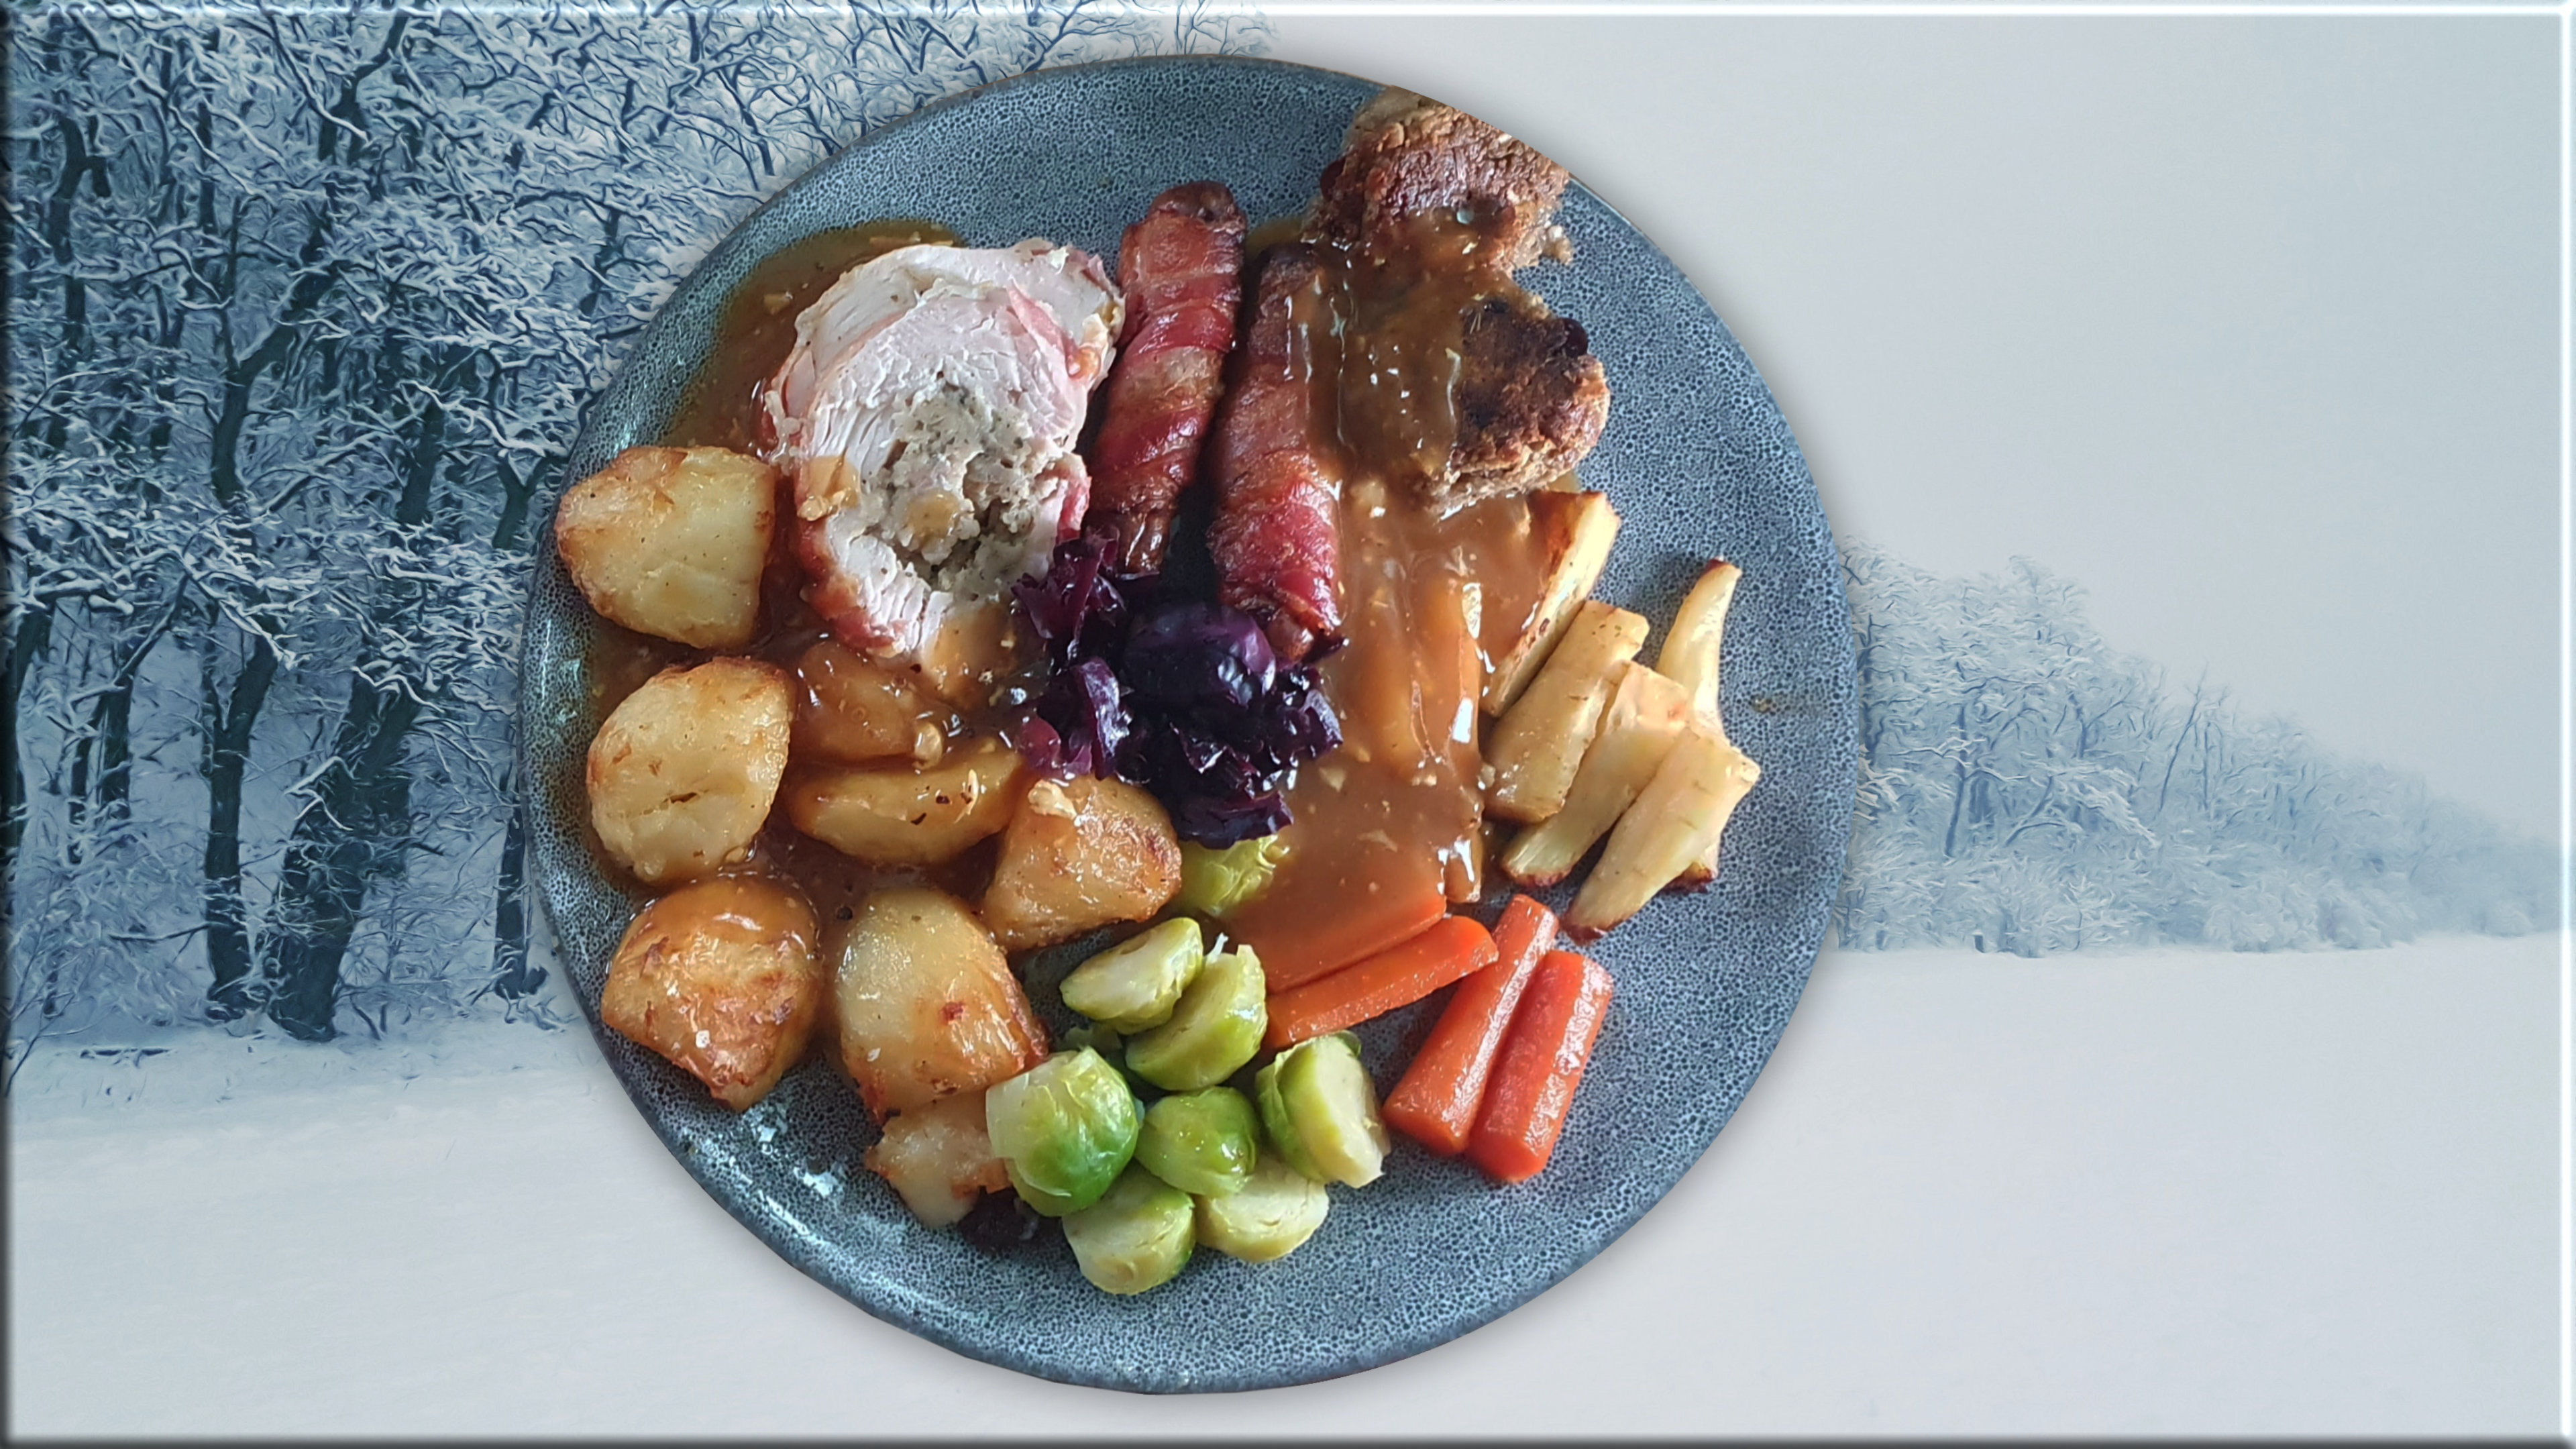 Budget Christmas Dinner - Only £2.50 a Head!